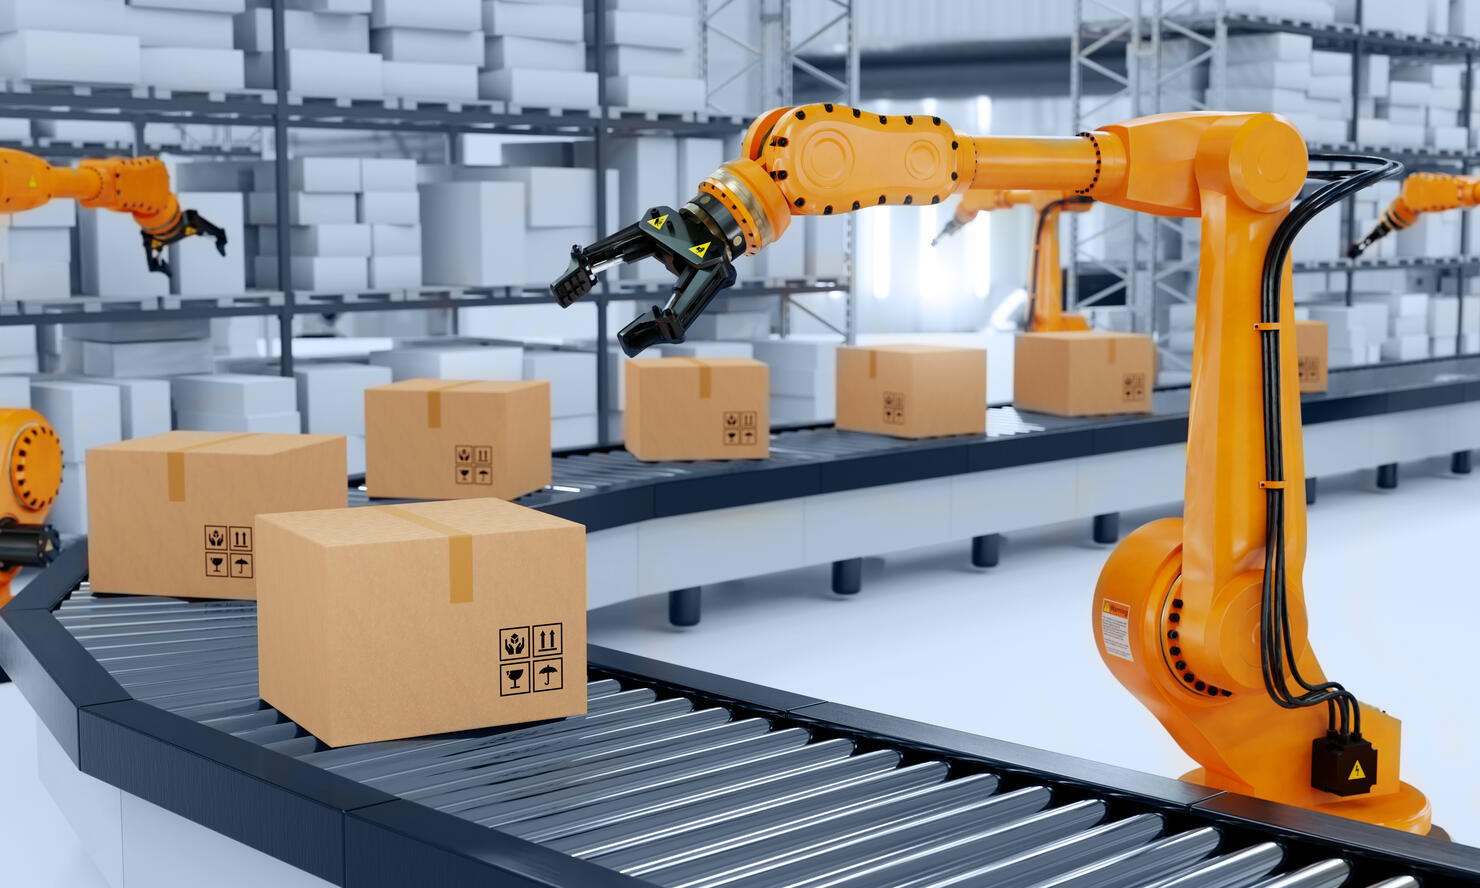 Industrial robot arm grabbing the cardboard box on roller conveyor rack with storage warehouse background. Technology and artificial intelligence innovation concept. 3D illustration rendering